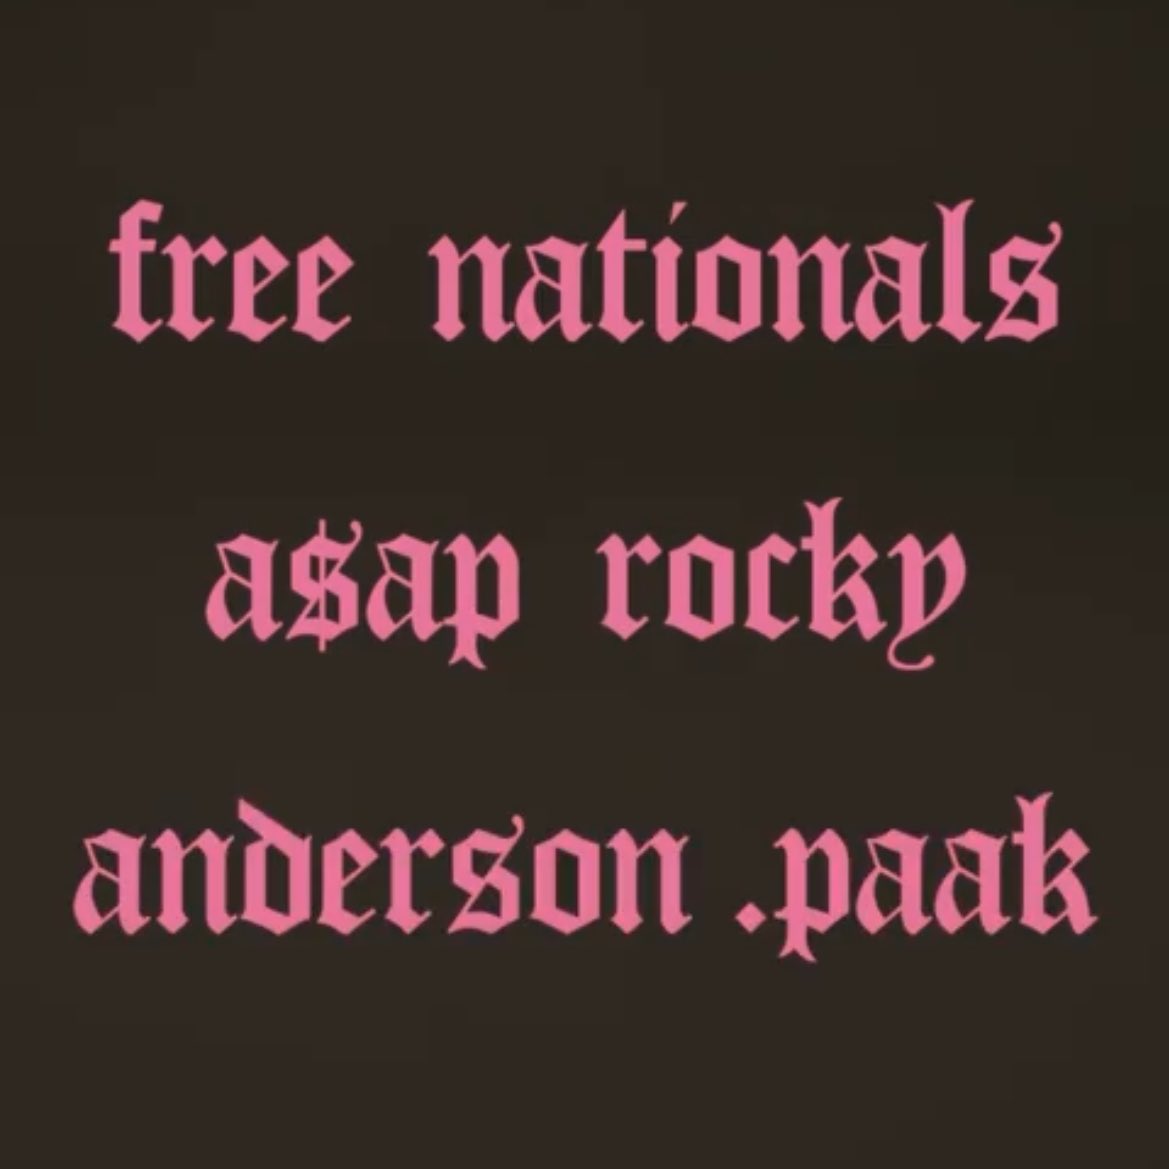 FREE NATIONALS A$AP ROCKY ANDERSON .PAAK GANGSTA 🚨FEBRUARY 23RD🚨